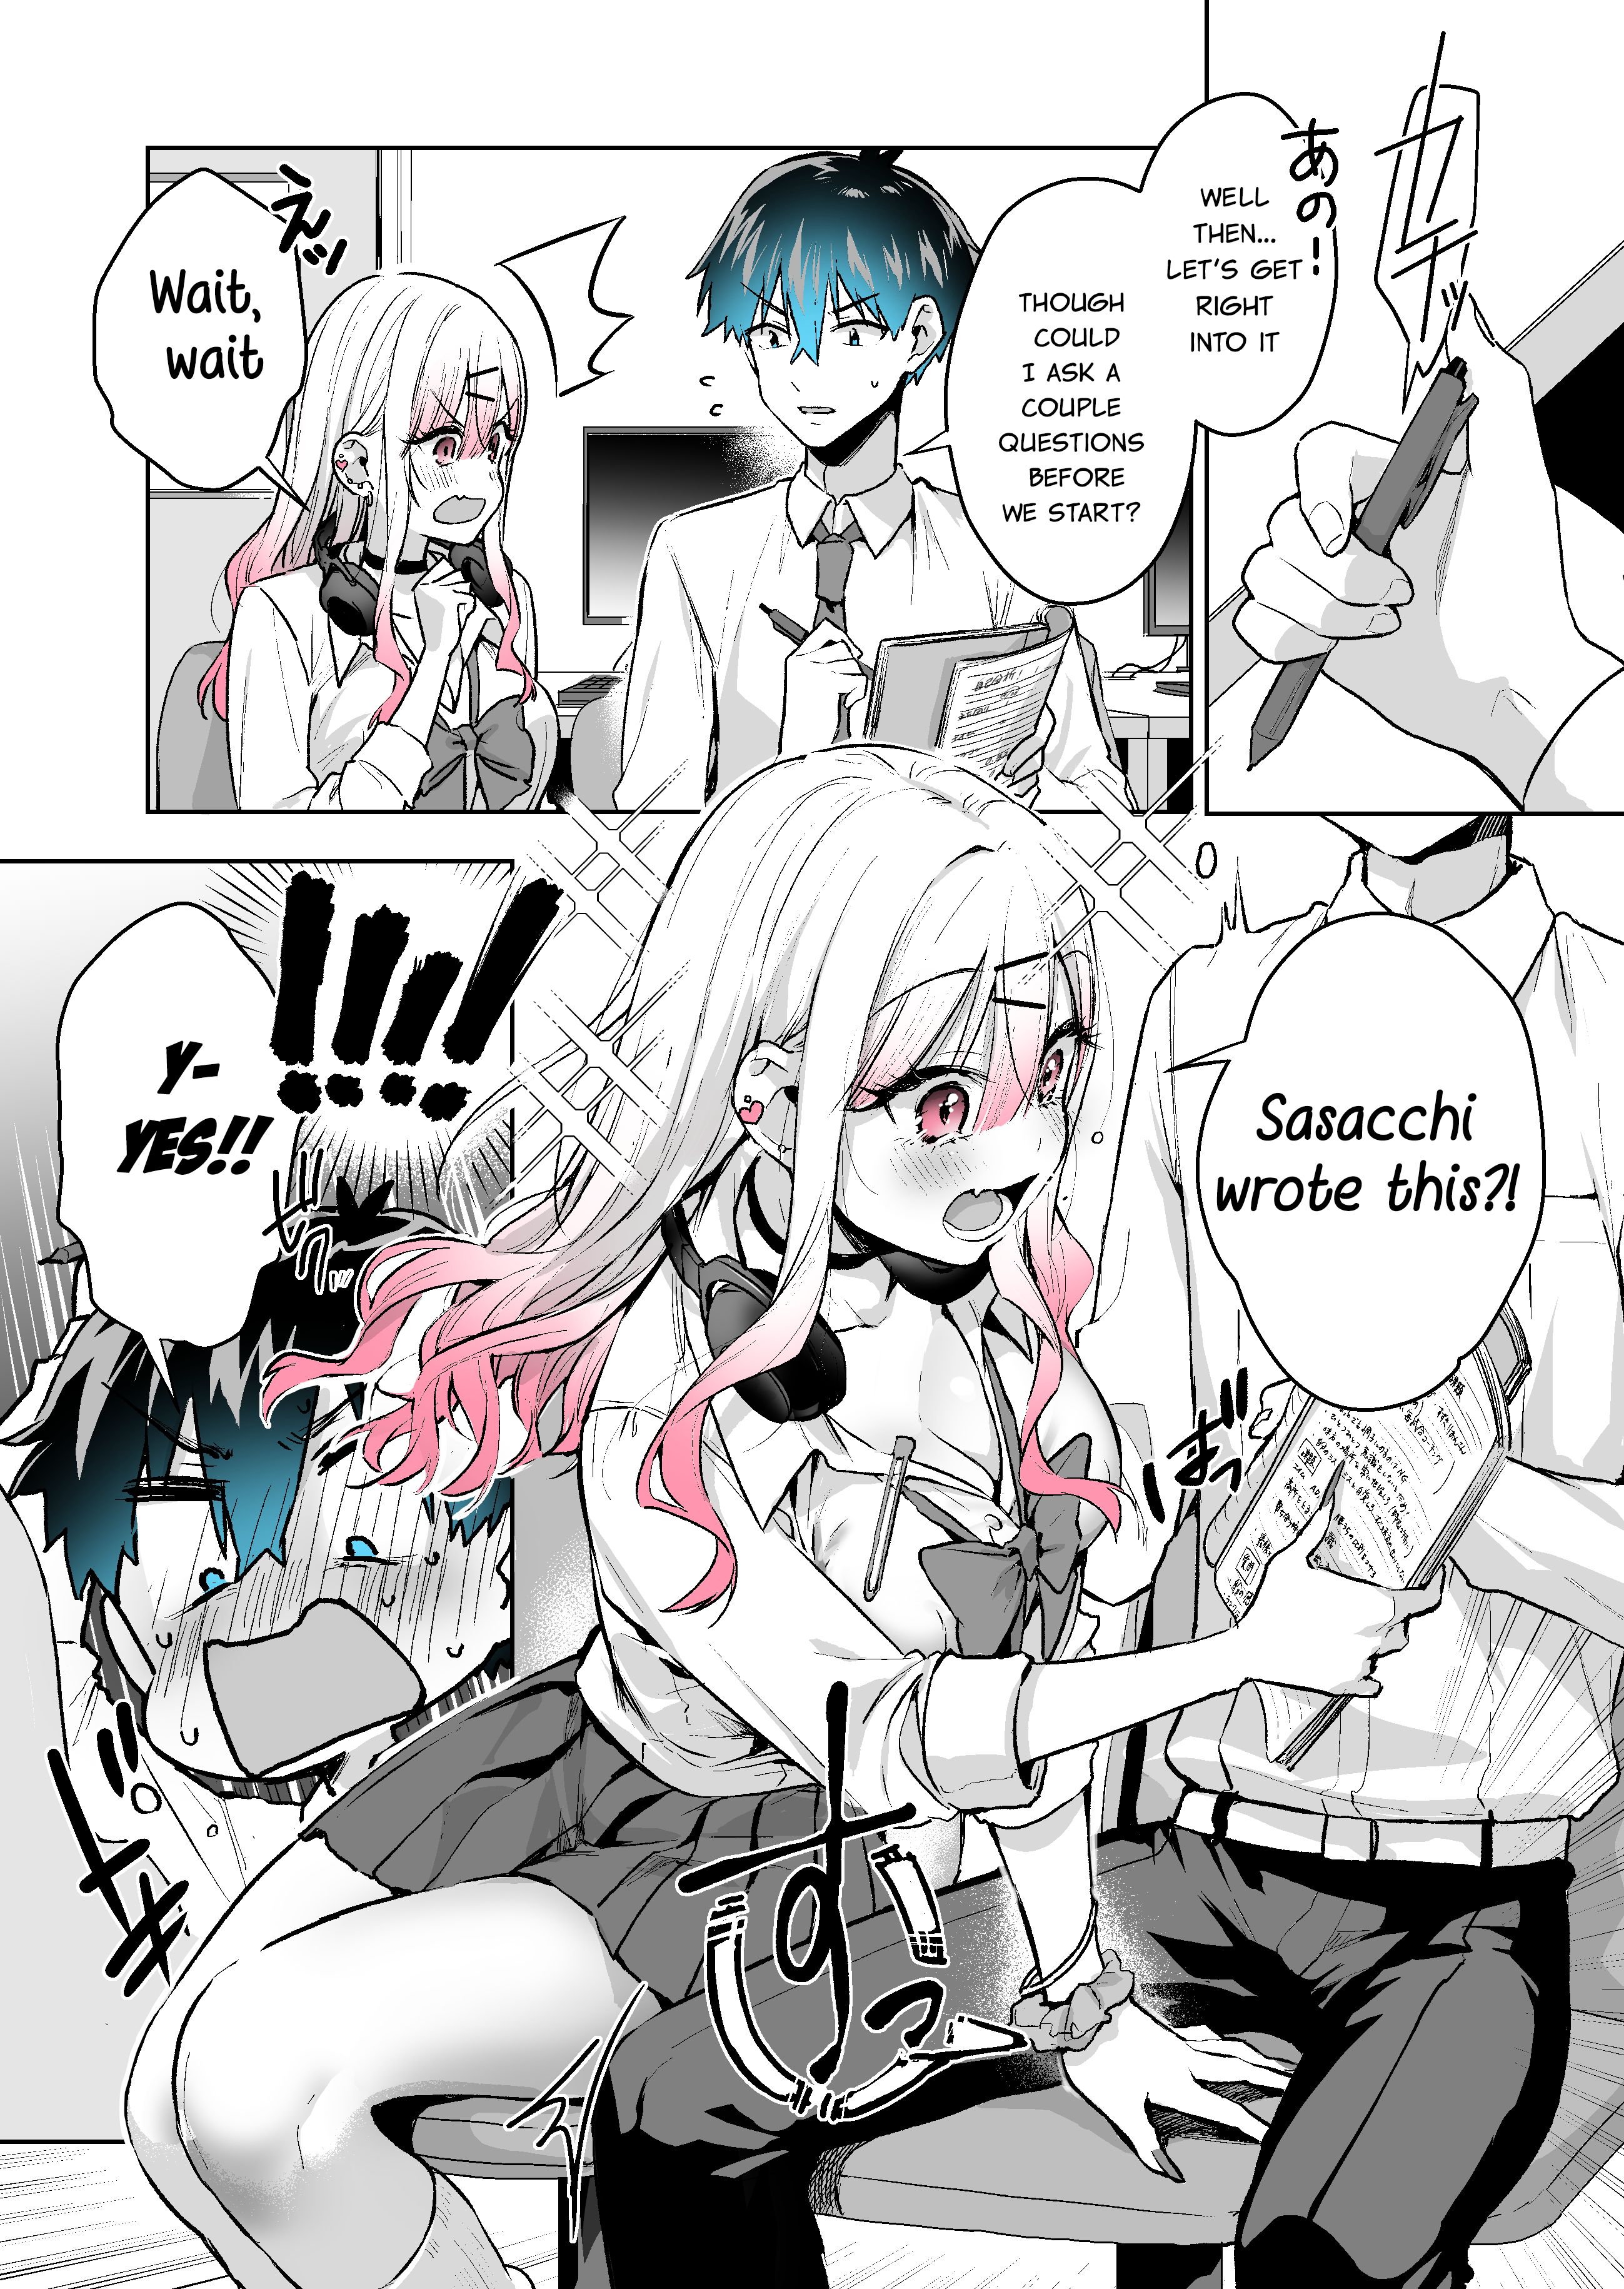 Want to Be Praised by a Gal Gamer - chapter 25 - #1